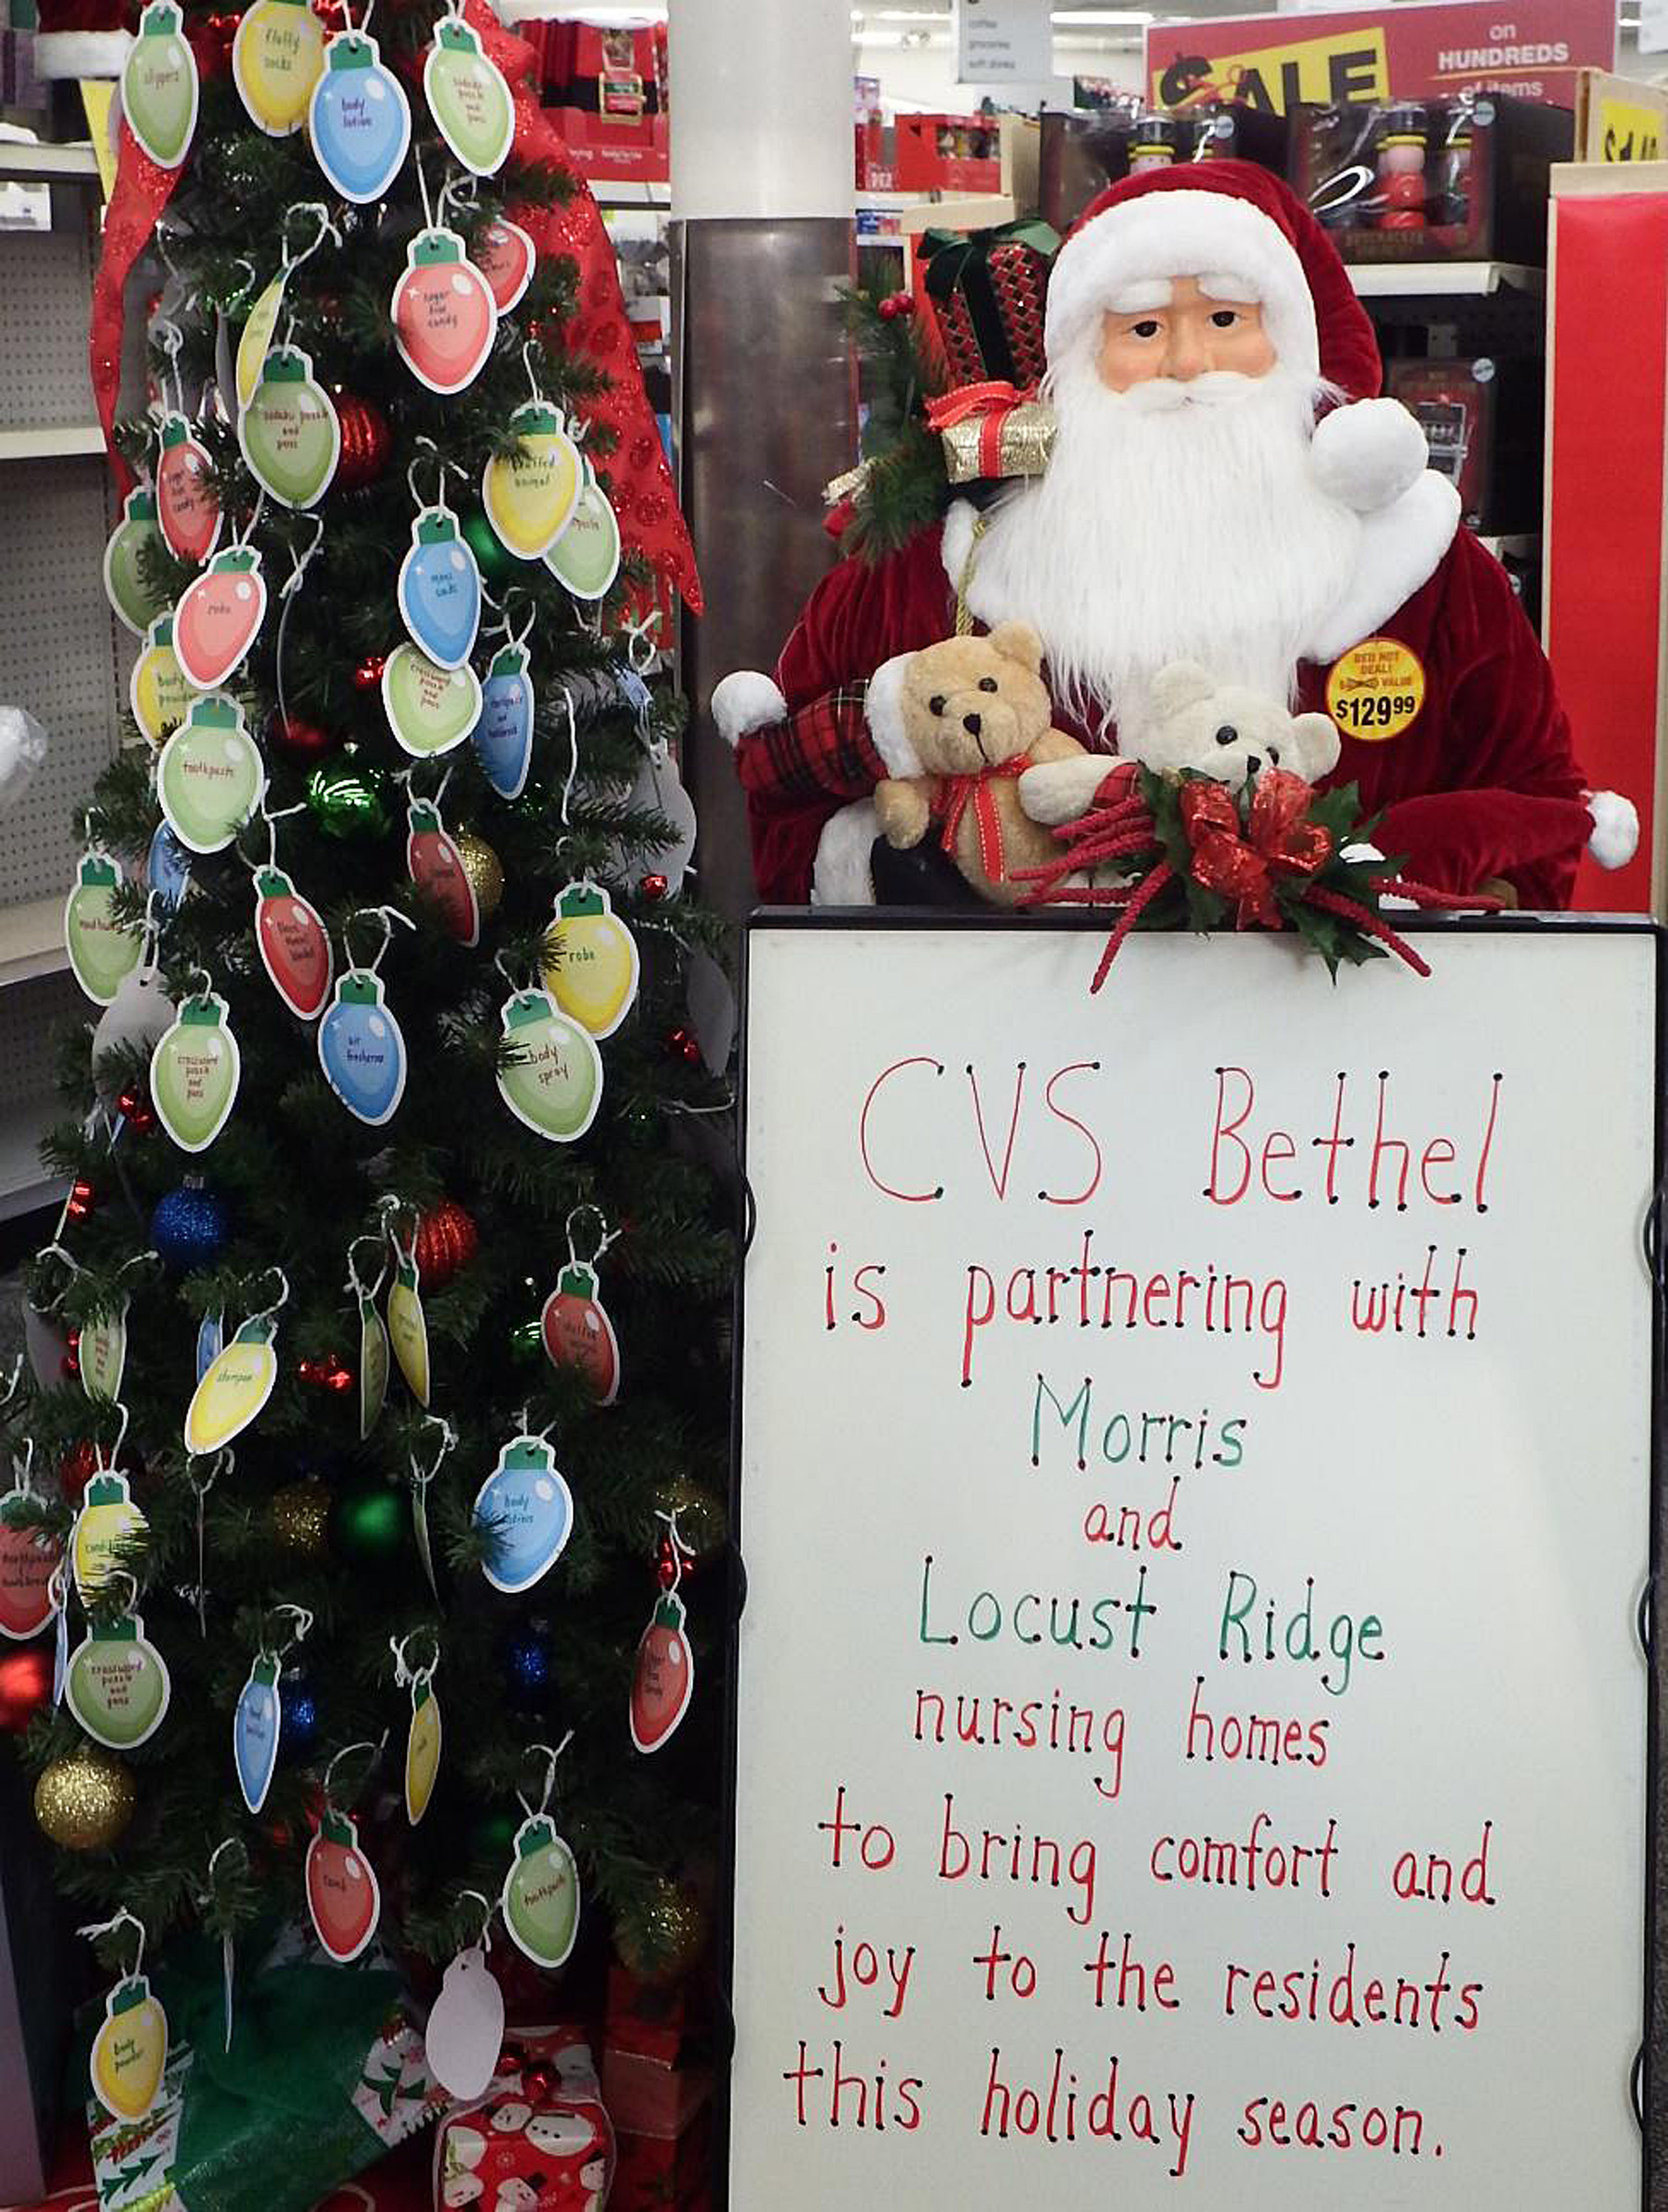 Bethel CVS: Sharing comfort and love with the community | The ...